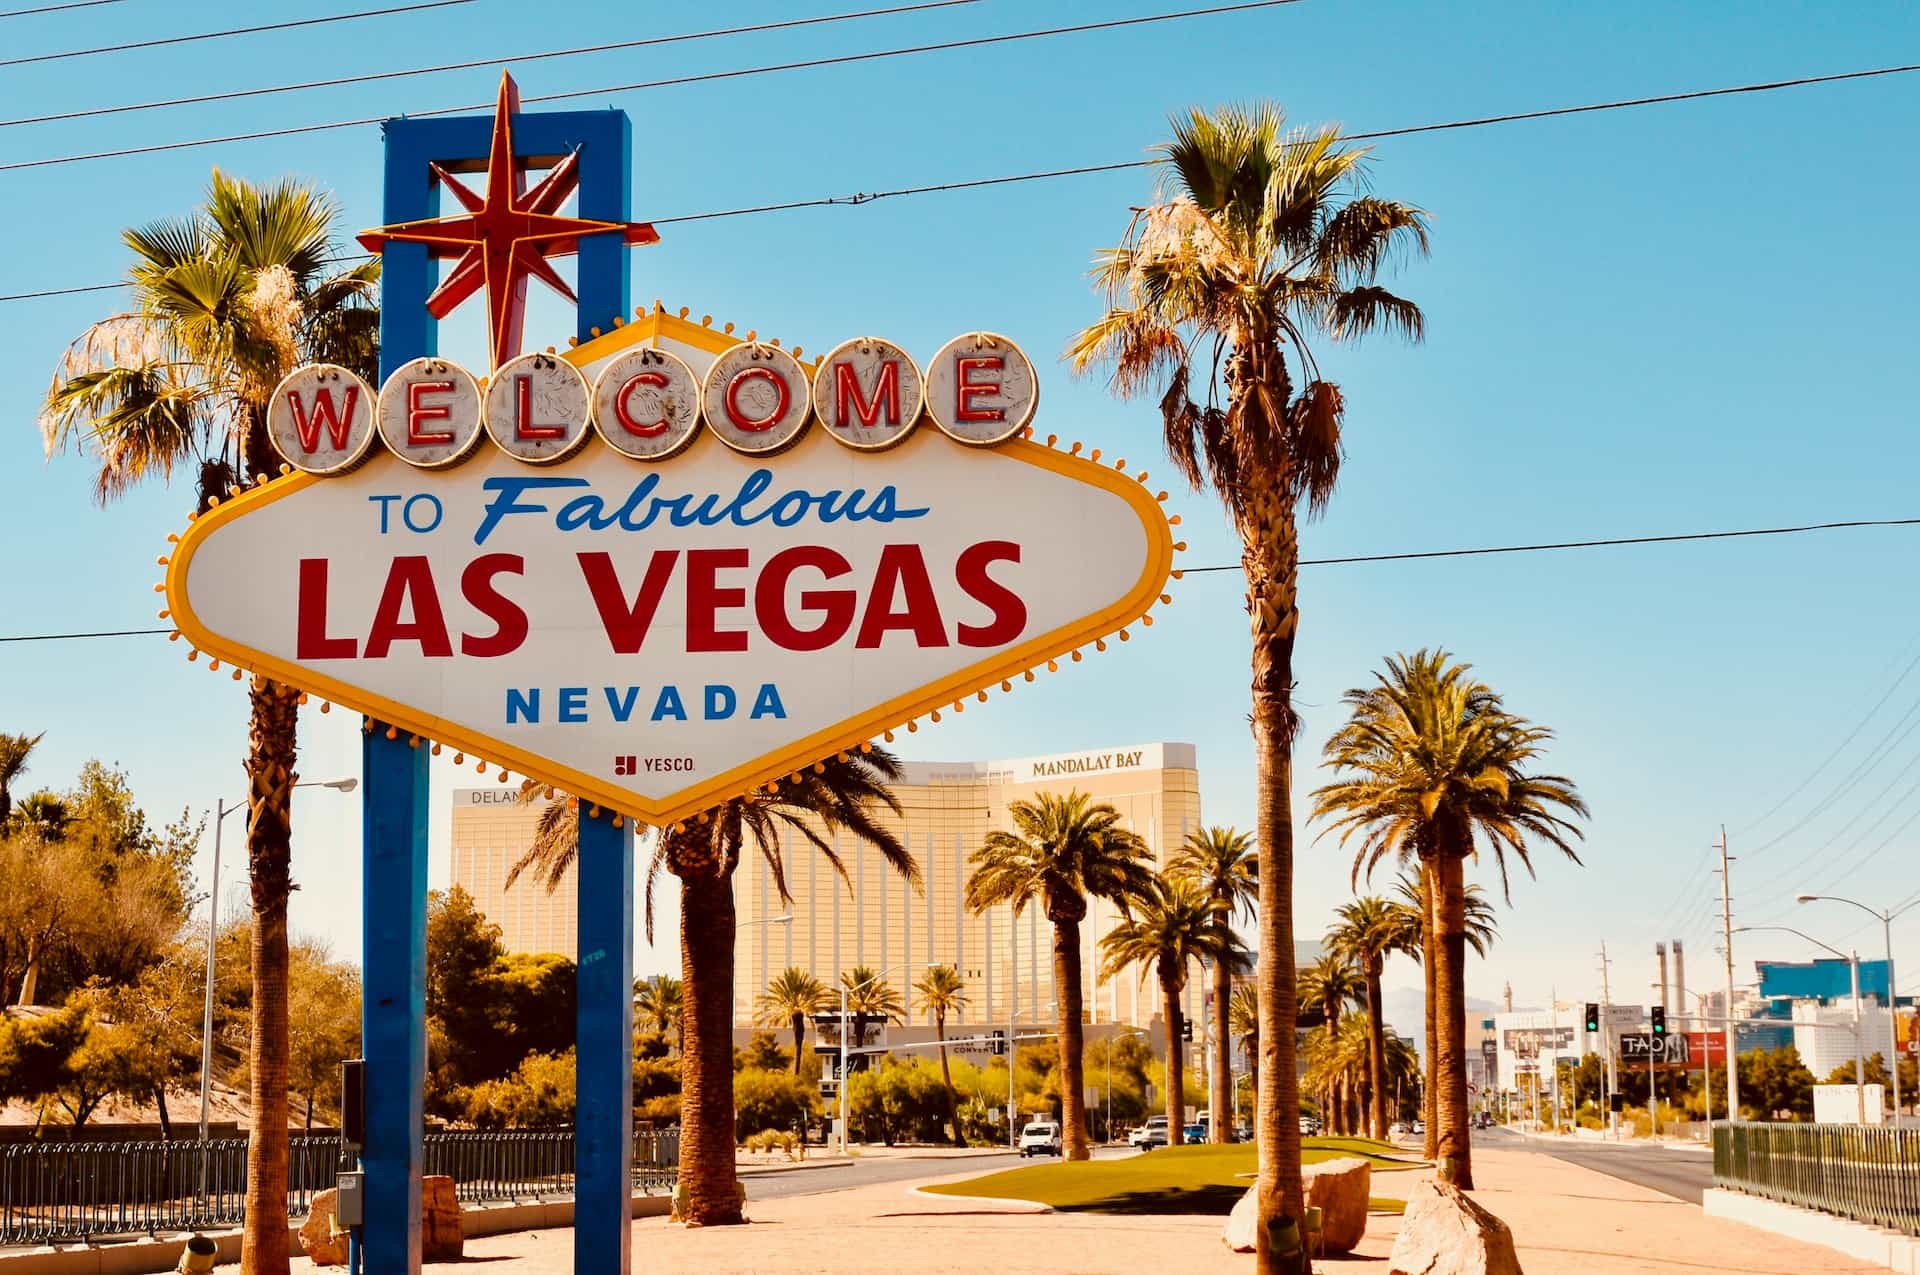 The iconic ‘Welcome to Las Vegas’ entrance sign in the city center, surrounded by palm trees and the Mandalay Bay hotel and casino standing behind it.